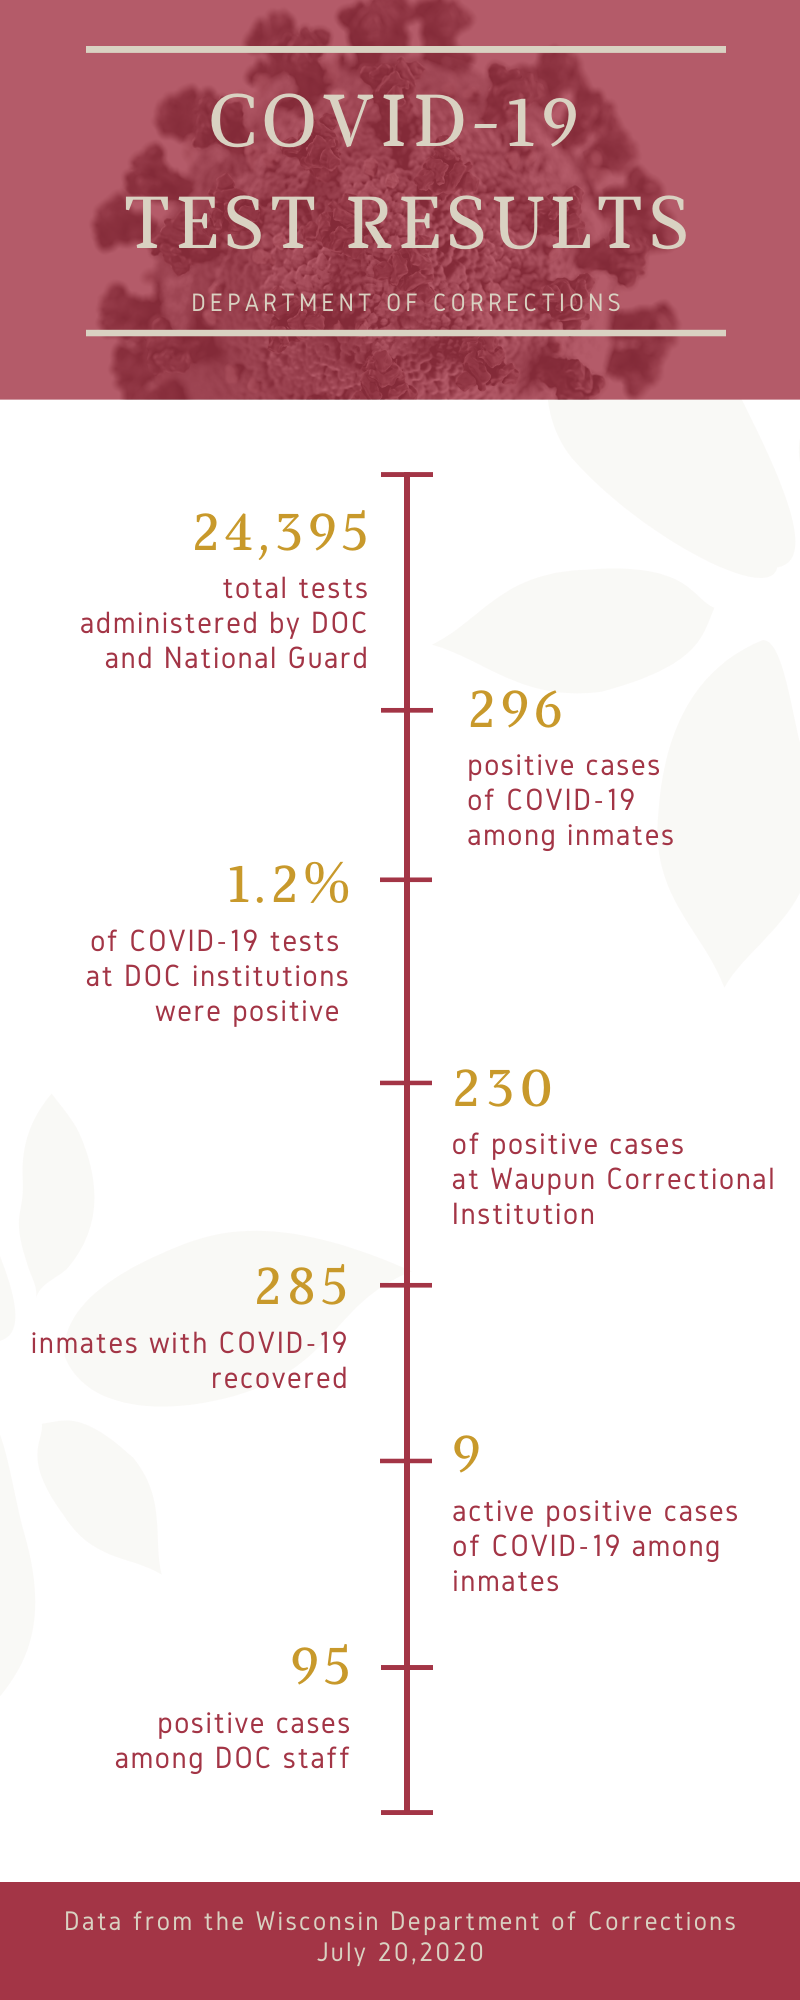 Infographic showing results of COVID-19 mass testing at Wisconsin DOC facilities